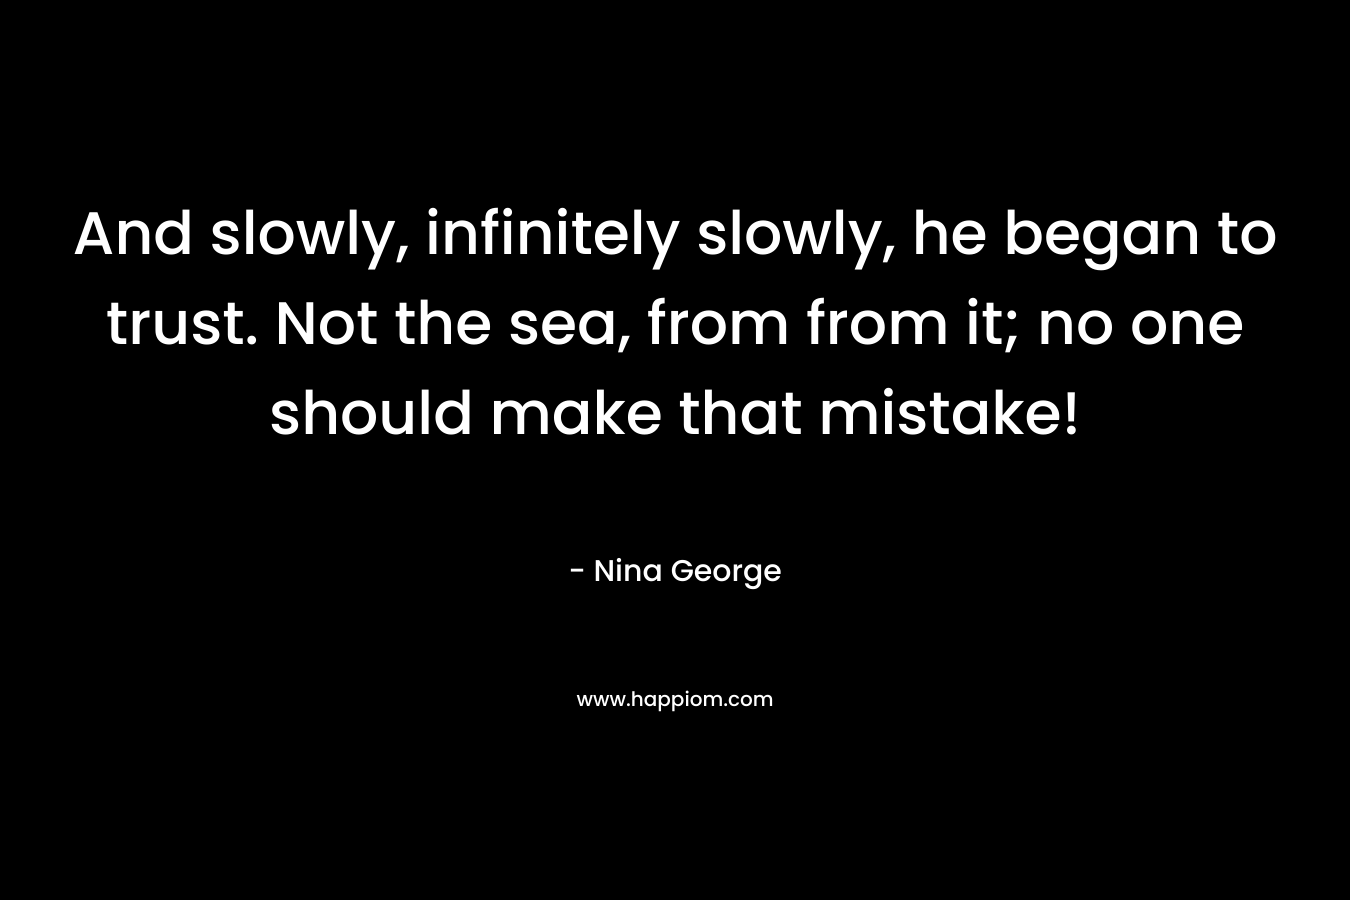 And slowly, infinitely slowly, he began to trust. Not the sea, from from it; no one should make that mistake! – Nina George